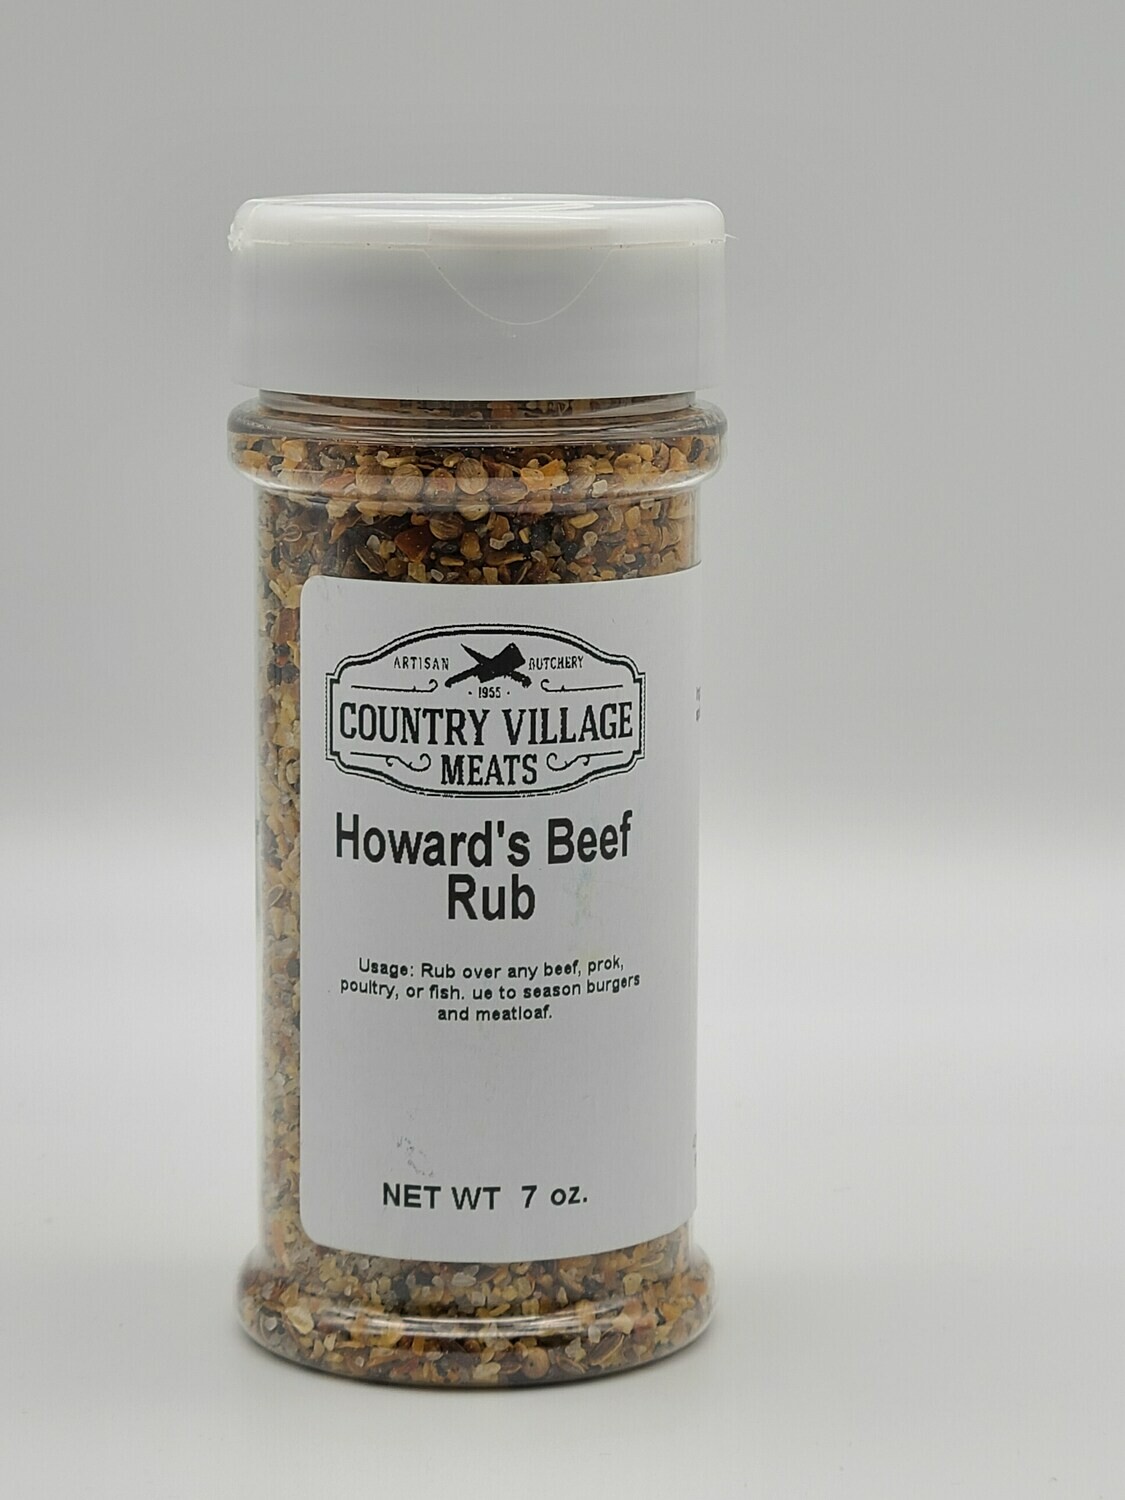 Country Village Meats - Howard's Beef Rub 7 oz.